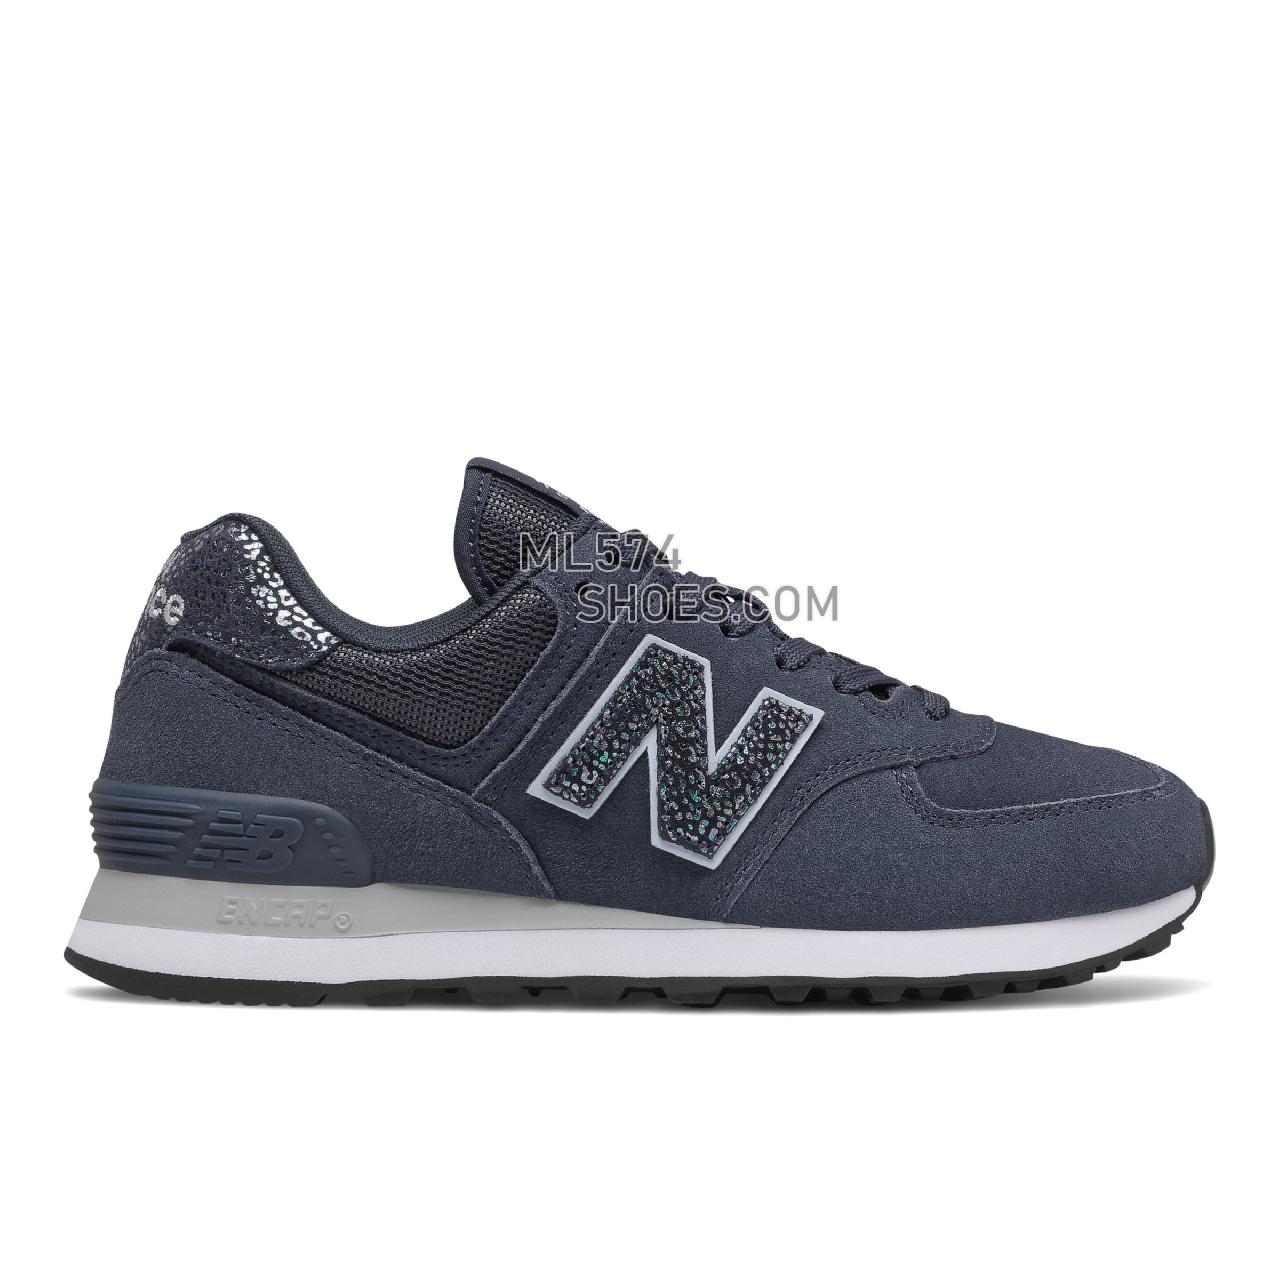 New Balance 574 - Women's Classic Sneakers - Nb Navy with White - WL574AM2